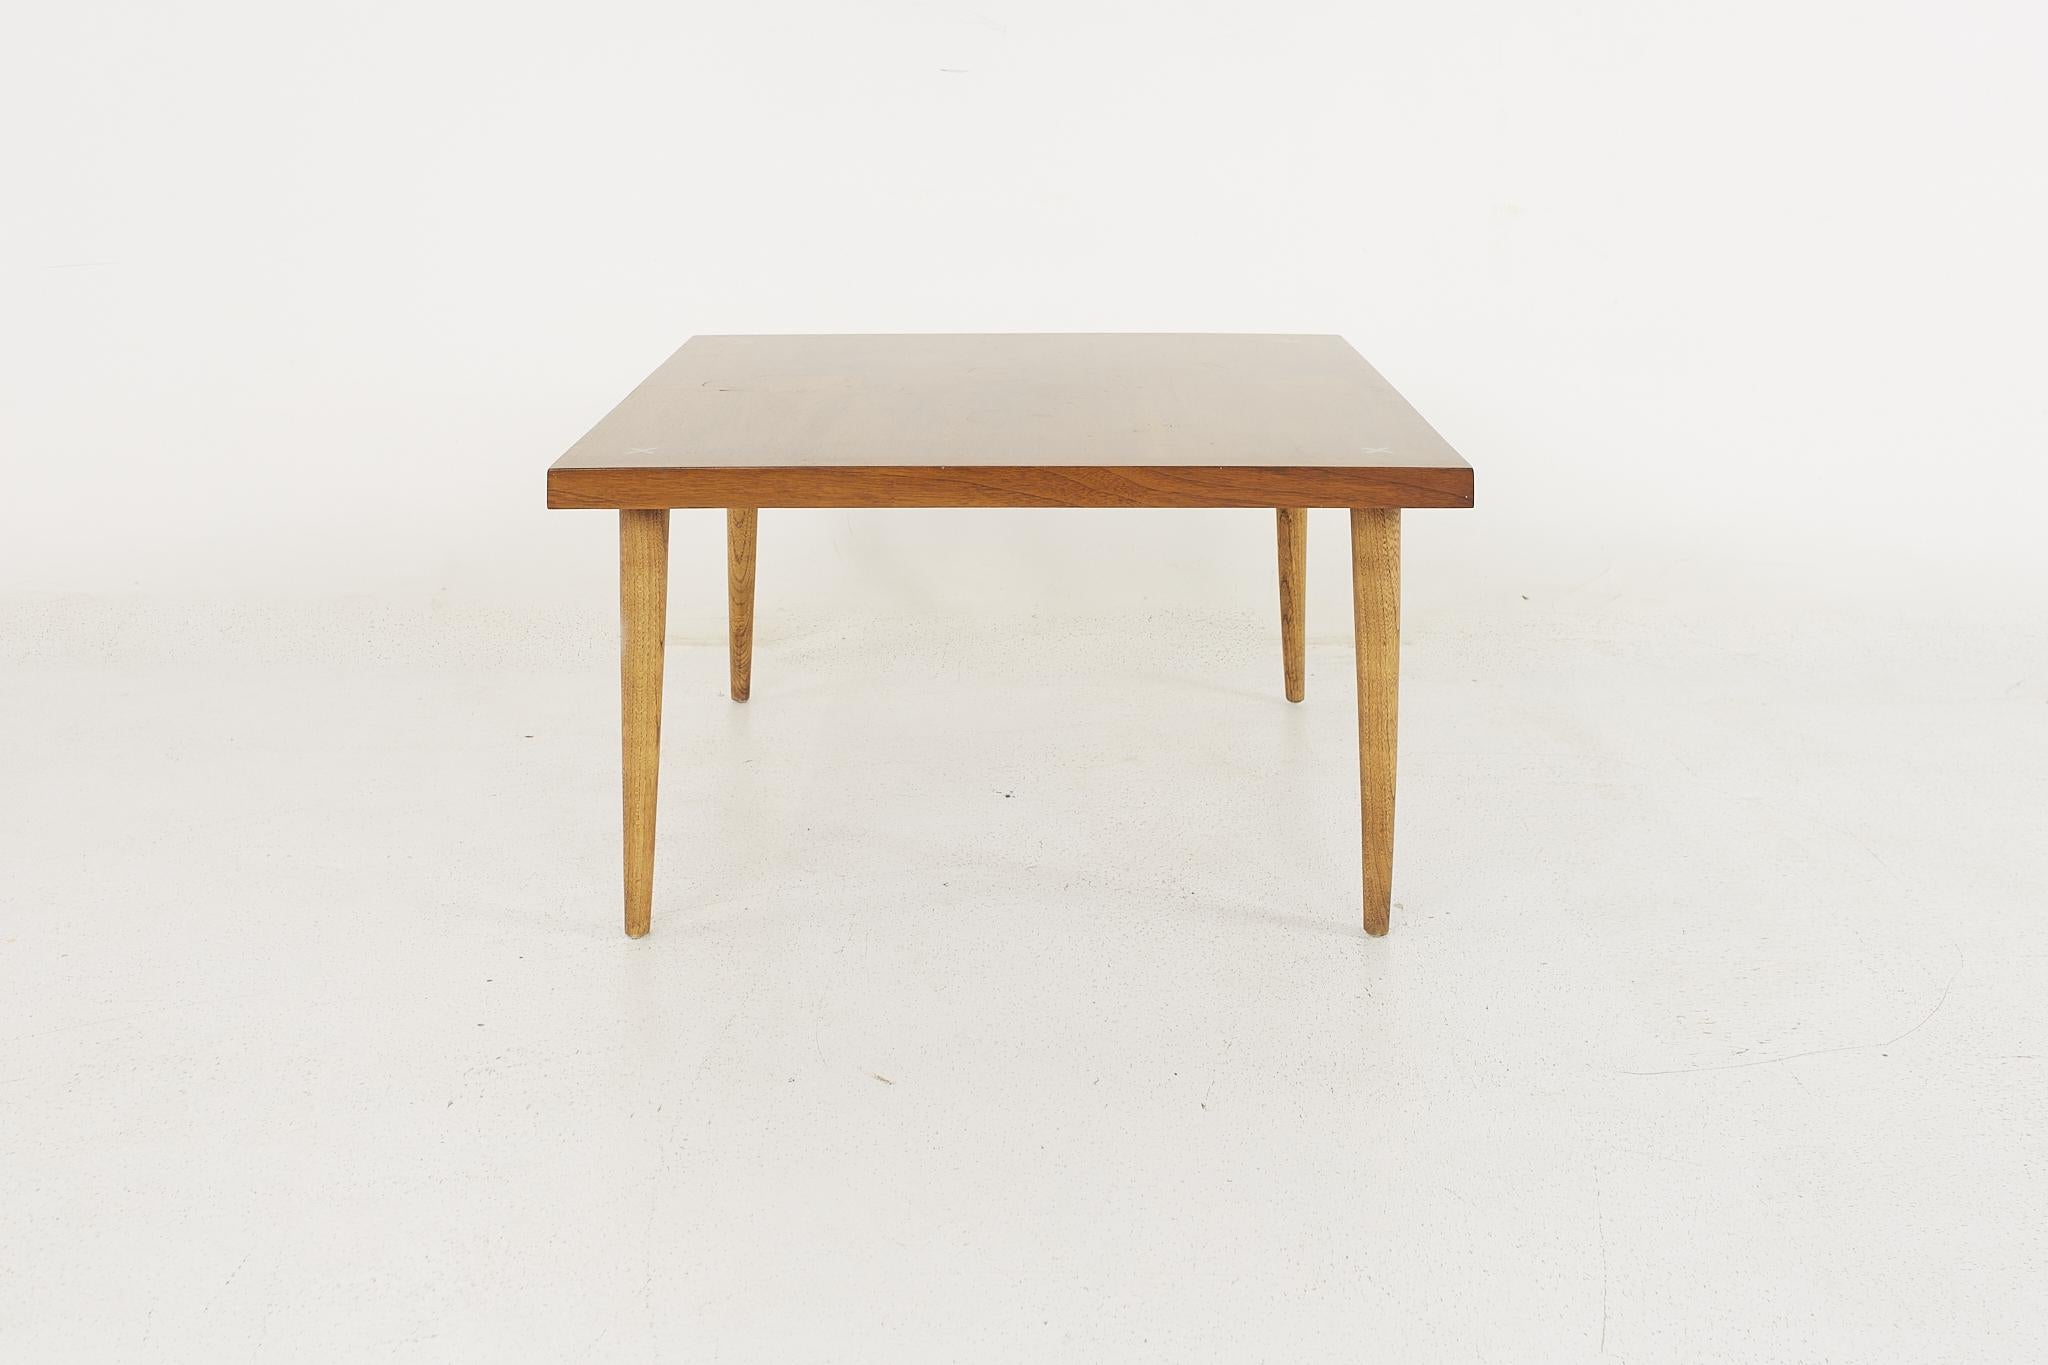 Merton Gershun for American of Martinsville mid century walnut square coffee table

The table measures: 31 wide x 31 deep x 16 inches high

All pieces of furniture can be had in what we call restored vintage condition. That means the piece is